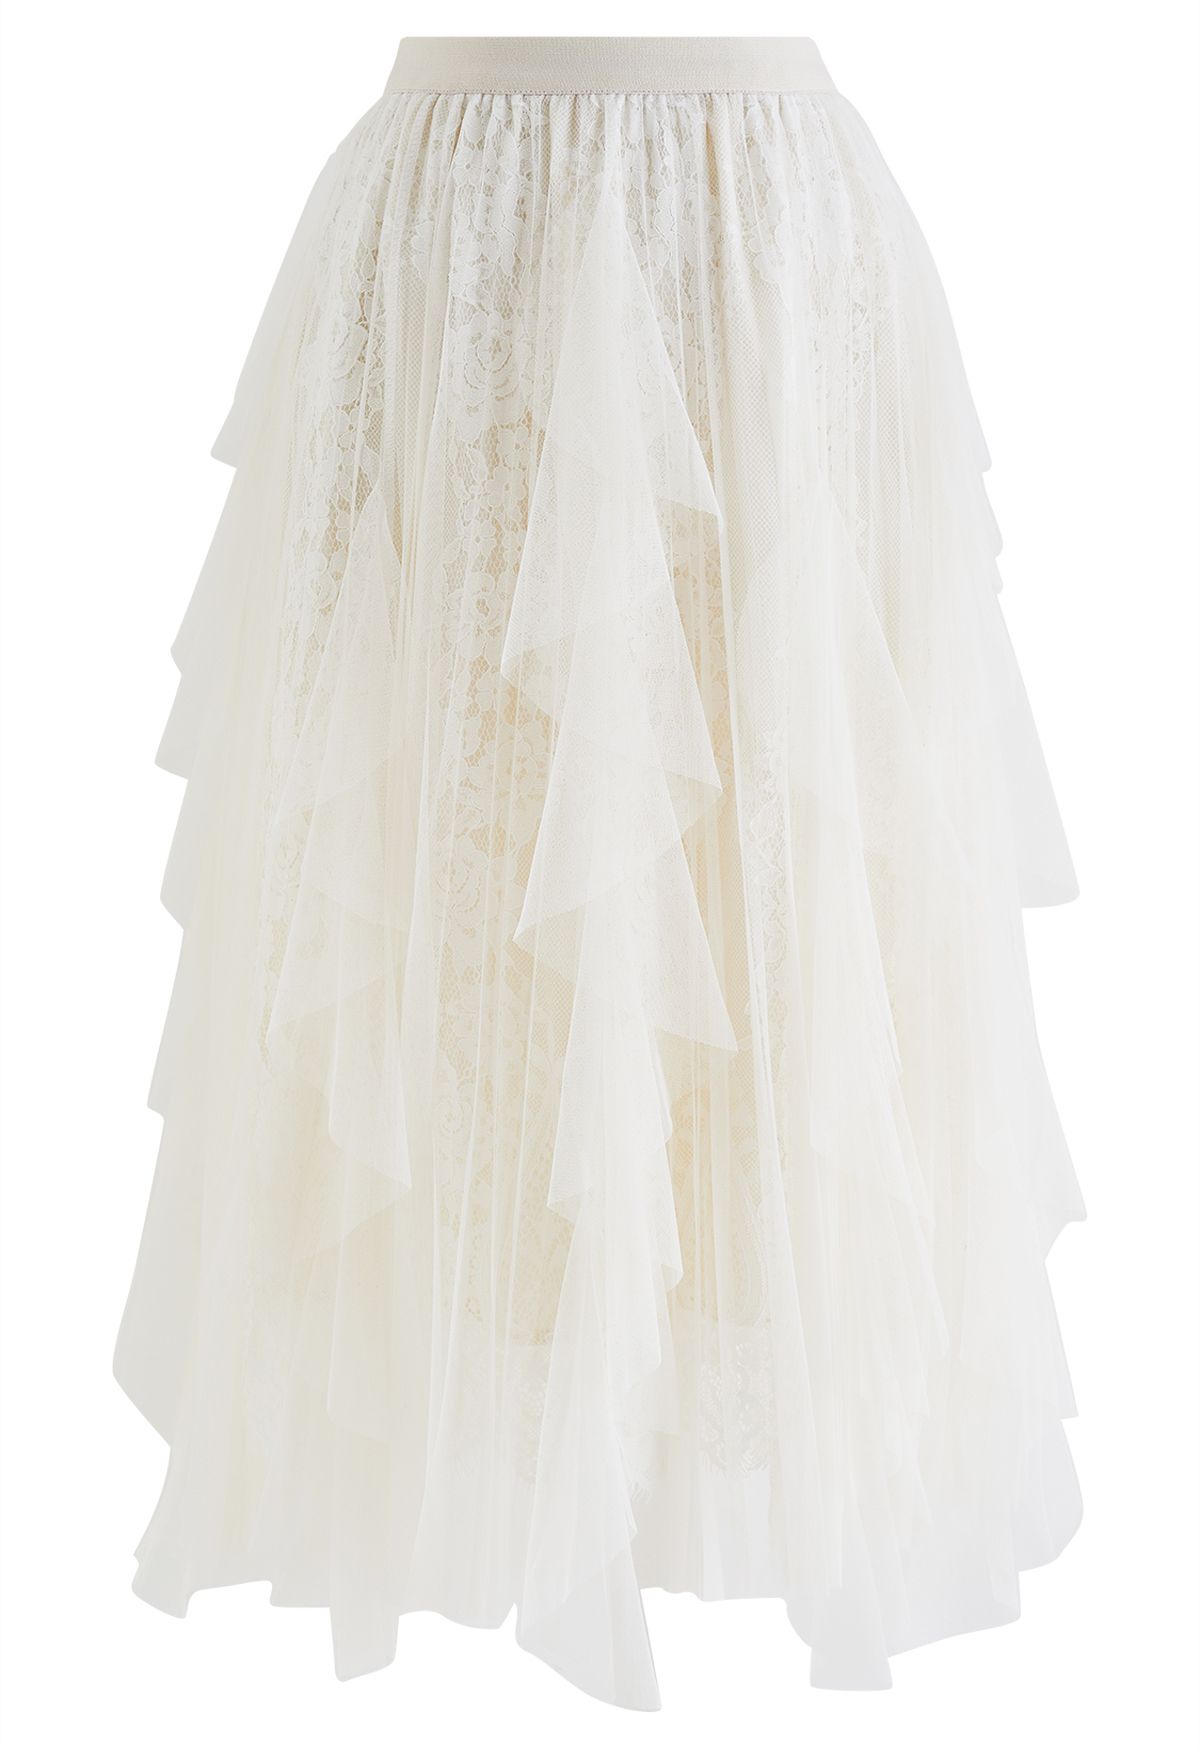 Floral Lace Ruffle Mesh Tulle Skirt in Ivory